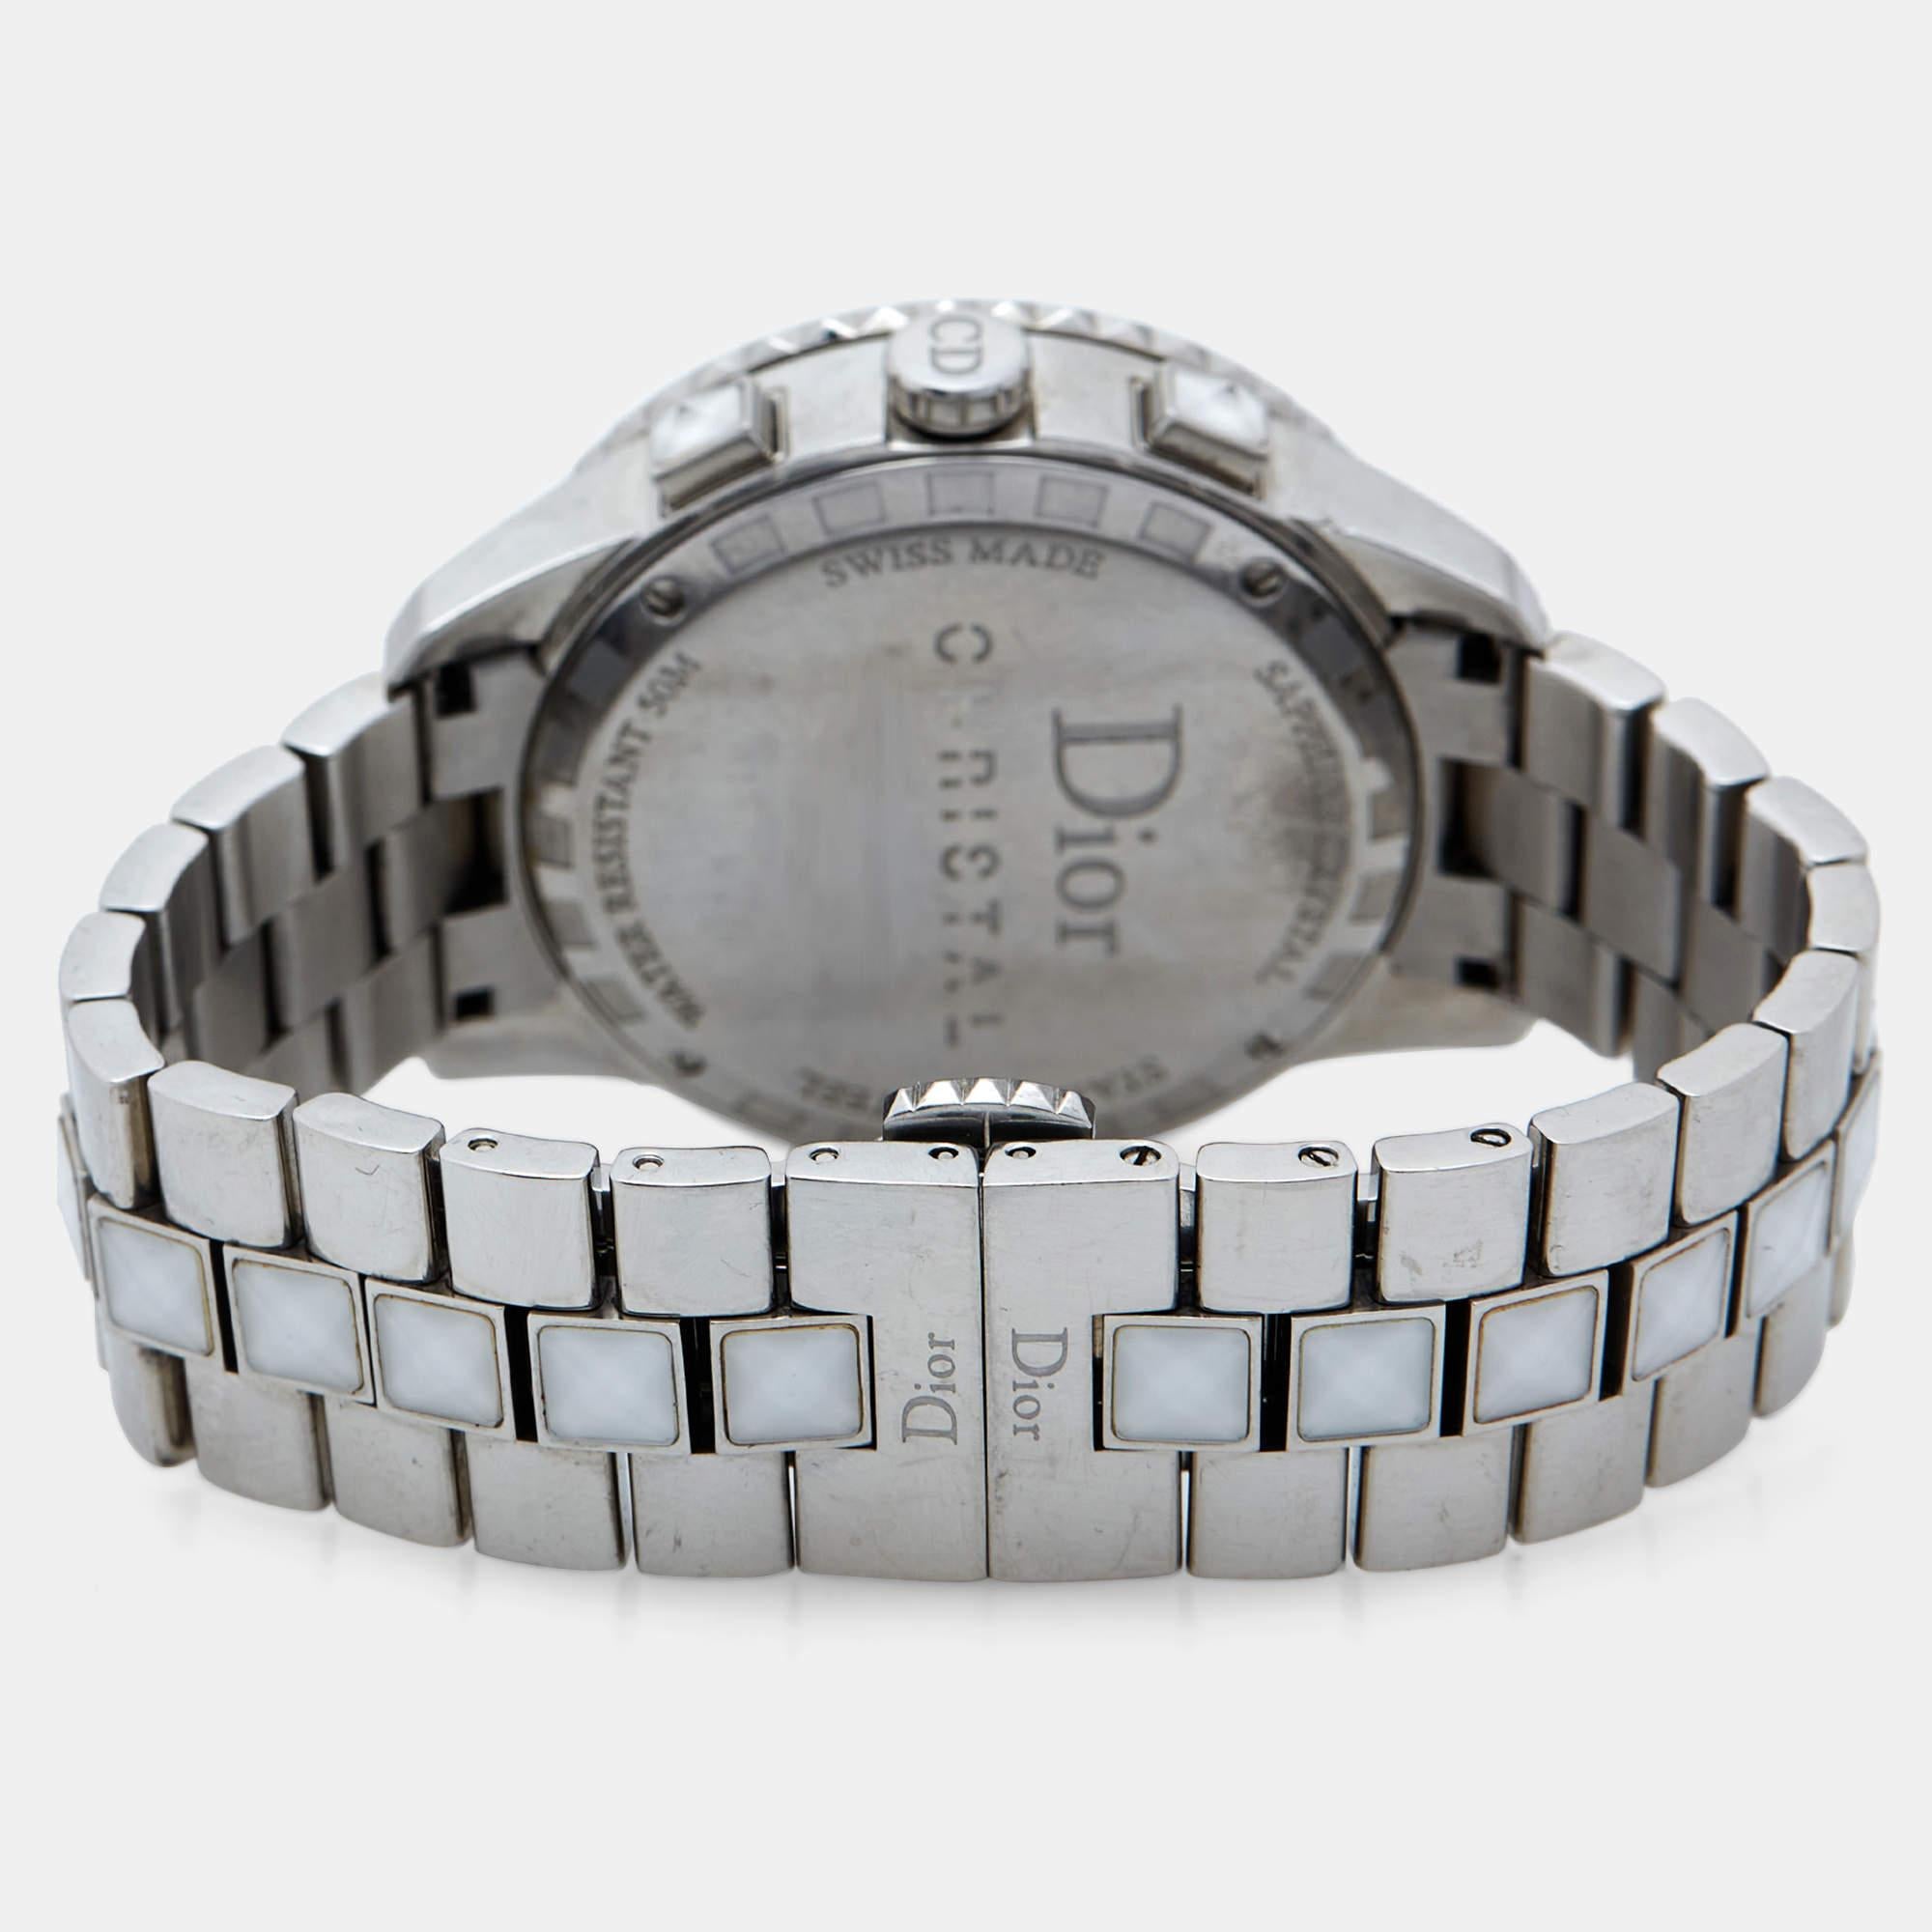 The Dior Christal watch's quality of balancing uber-elegant elements with a bold, classic round shape makes it a coveted accessory that looks great when it's on the wrist and even when it is not. This Dior Christal CD114311M001 is made of stainless